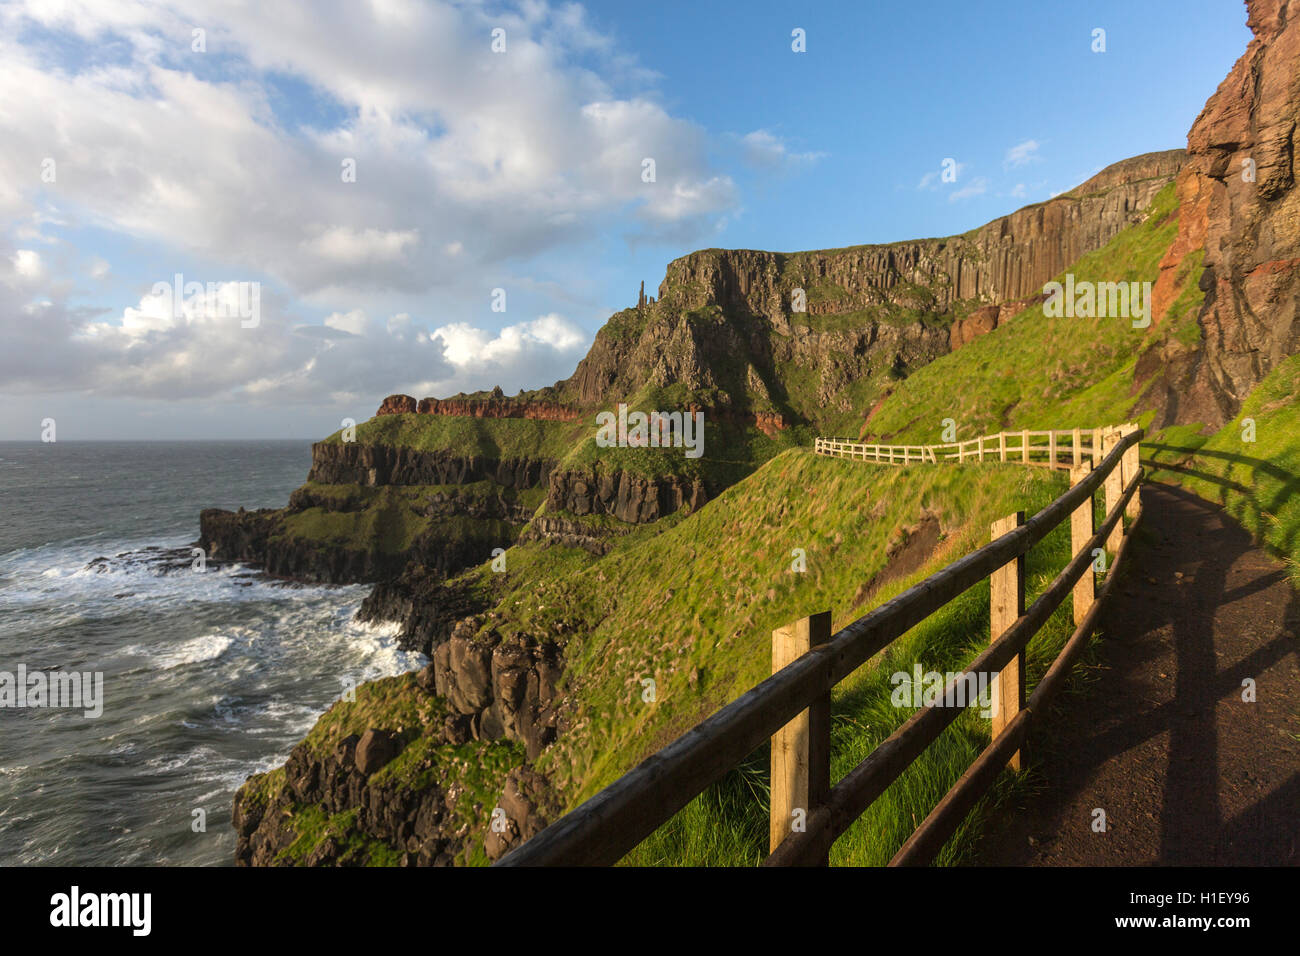 Giant's Causeway walk route closed looking the Chimney stacks, Bushmills, County Antrim, Northern Ireland, UK Stock Photo